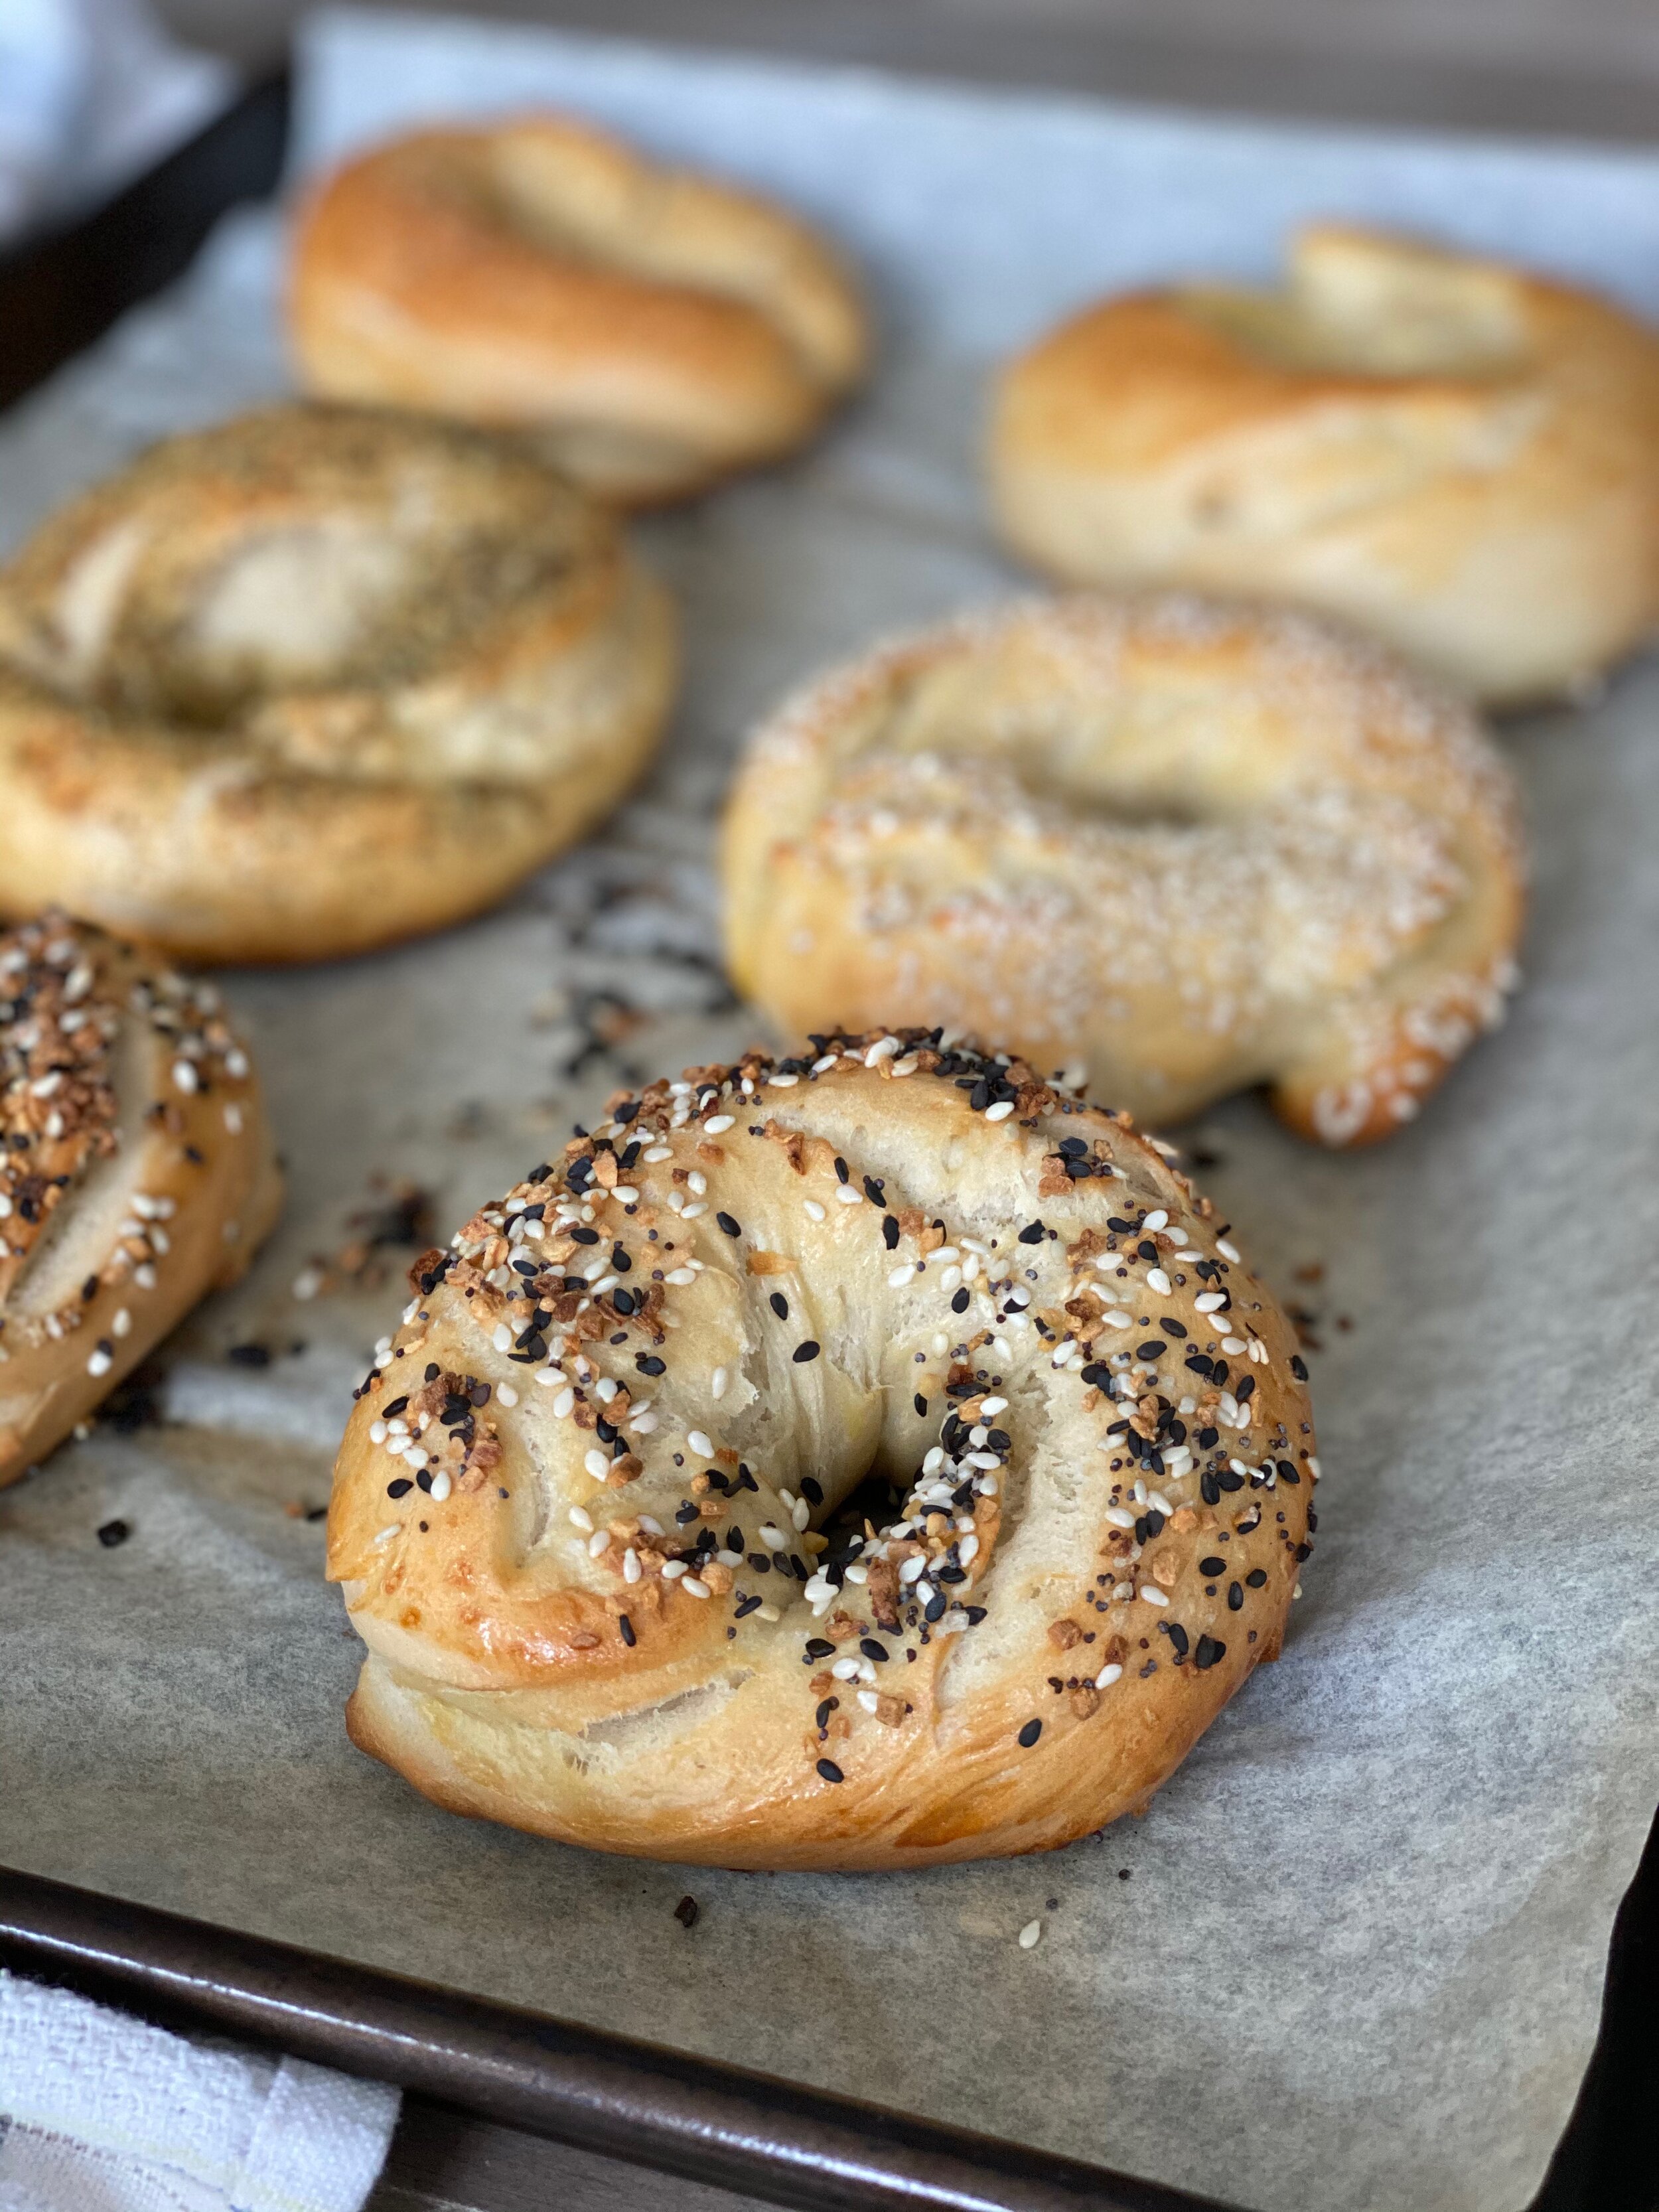 Anna's Homemade New York-Style Bagels